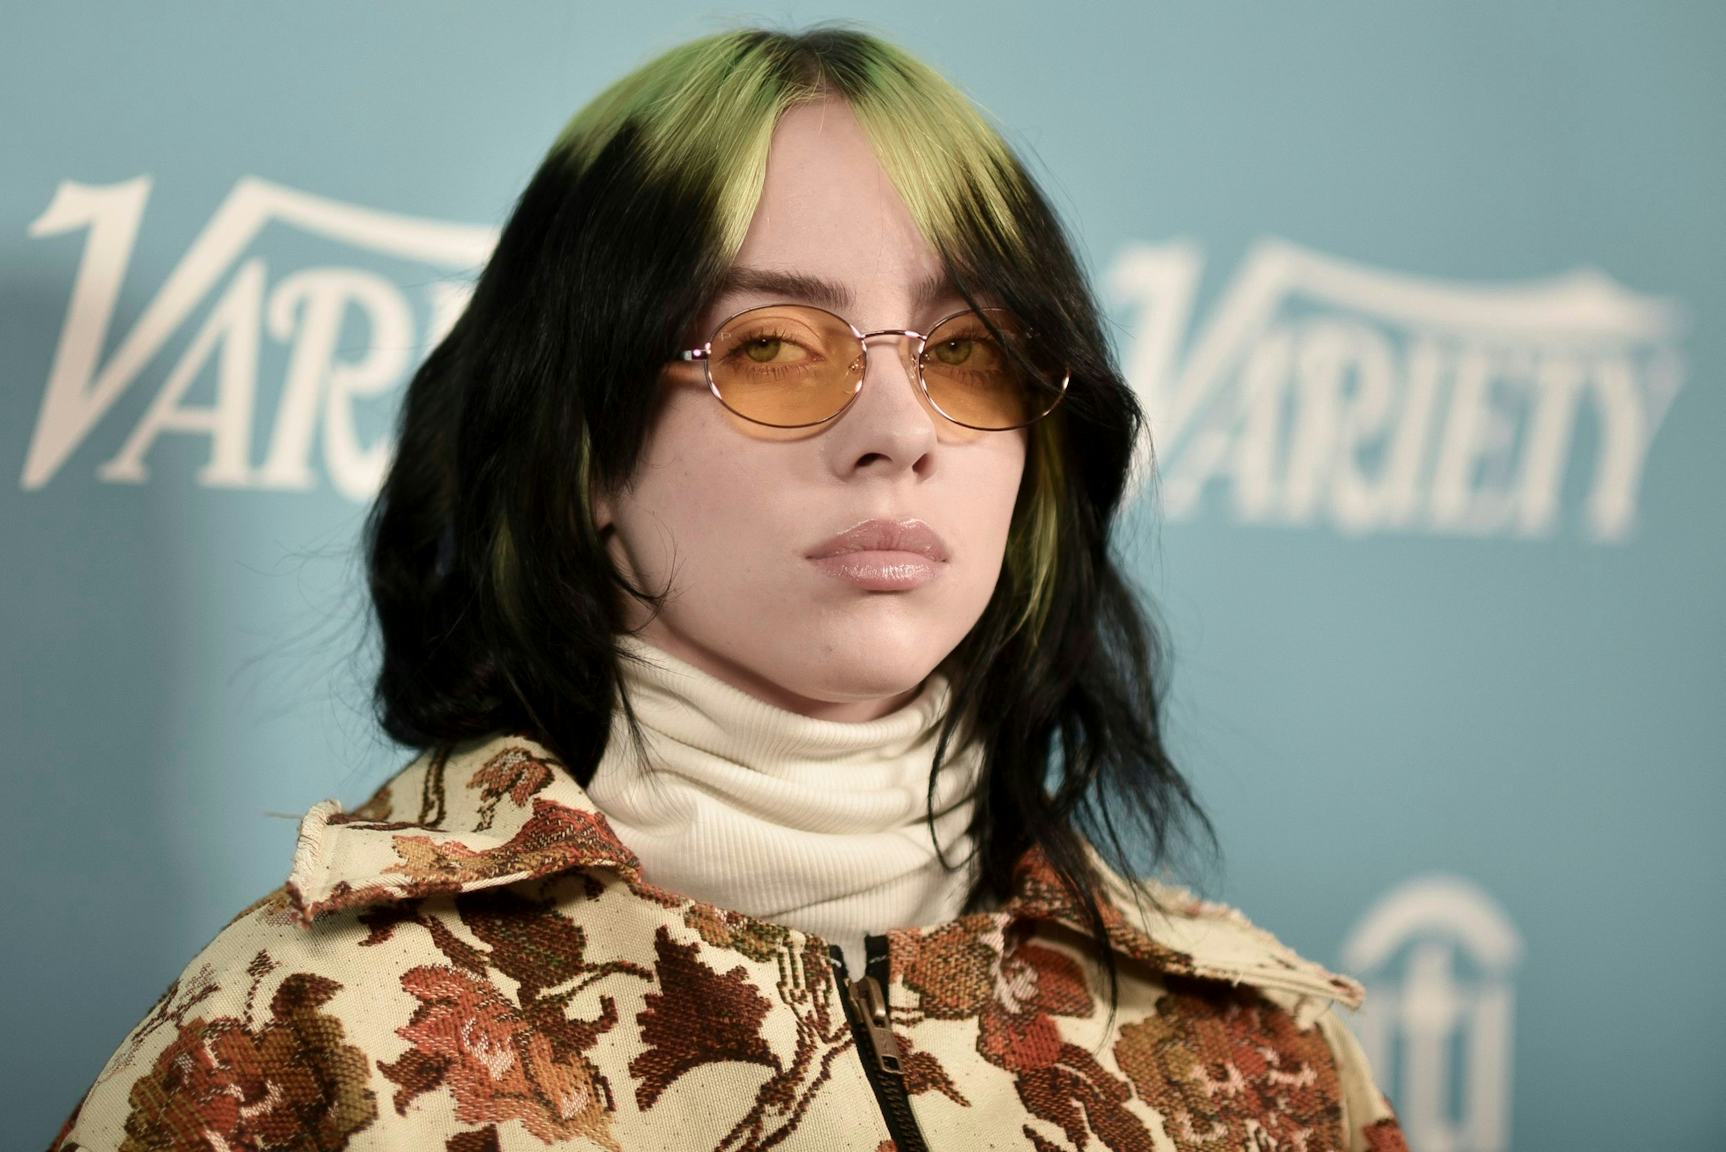 Billie Eilish just dropped a sustainable clothing line with H&M